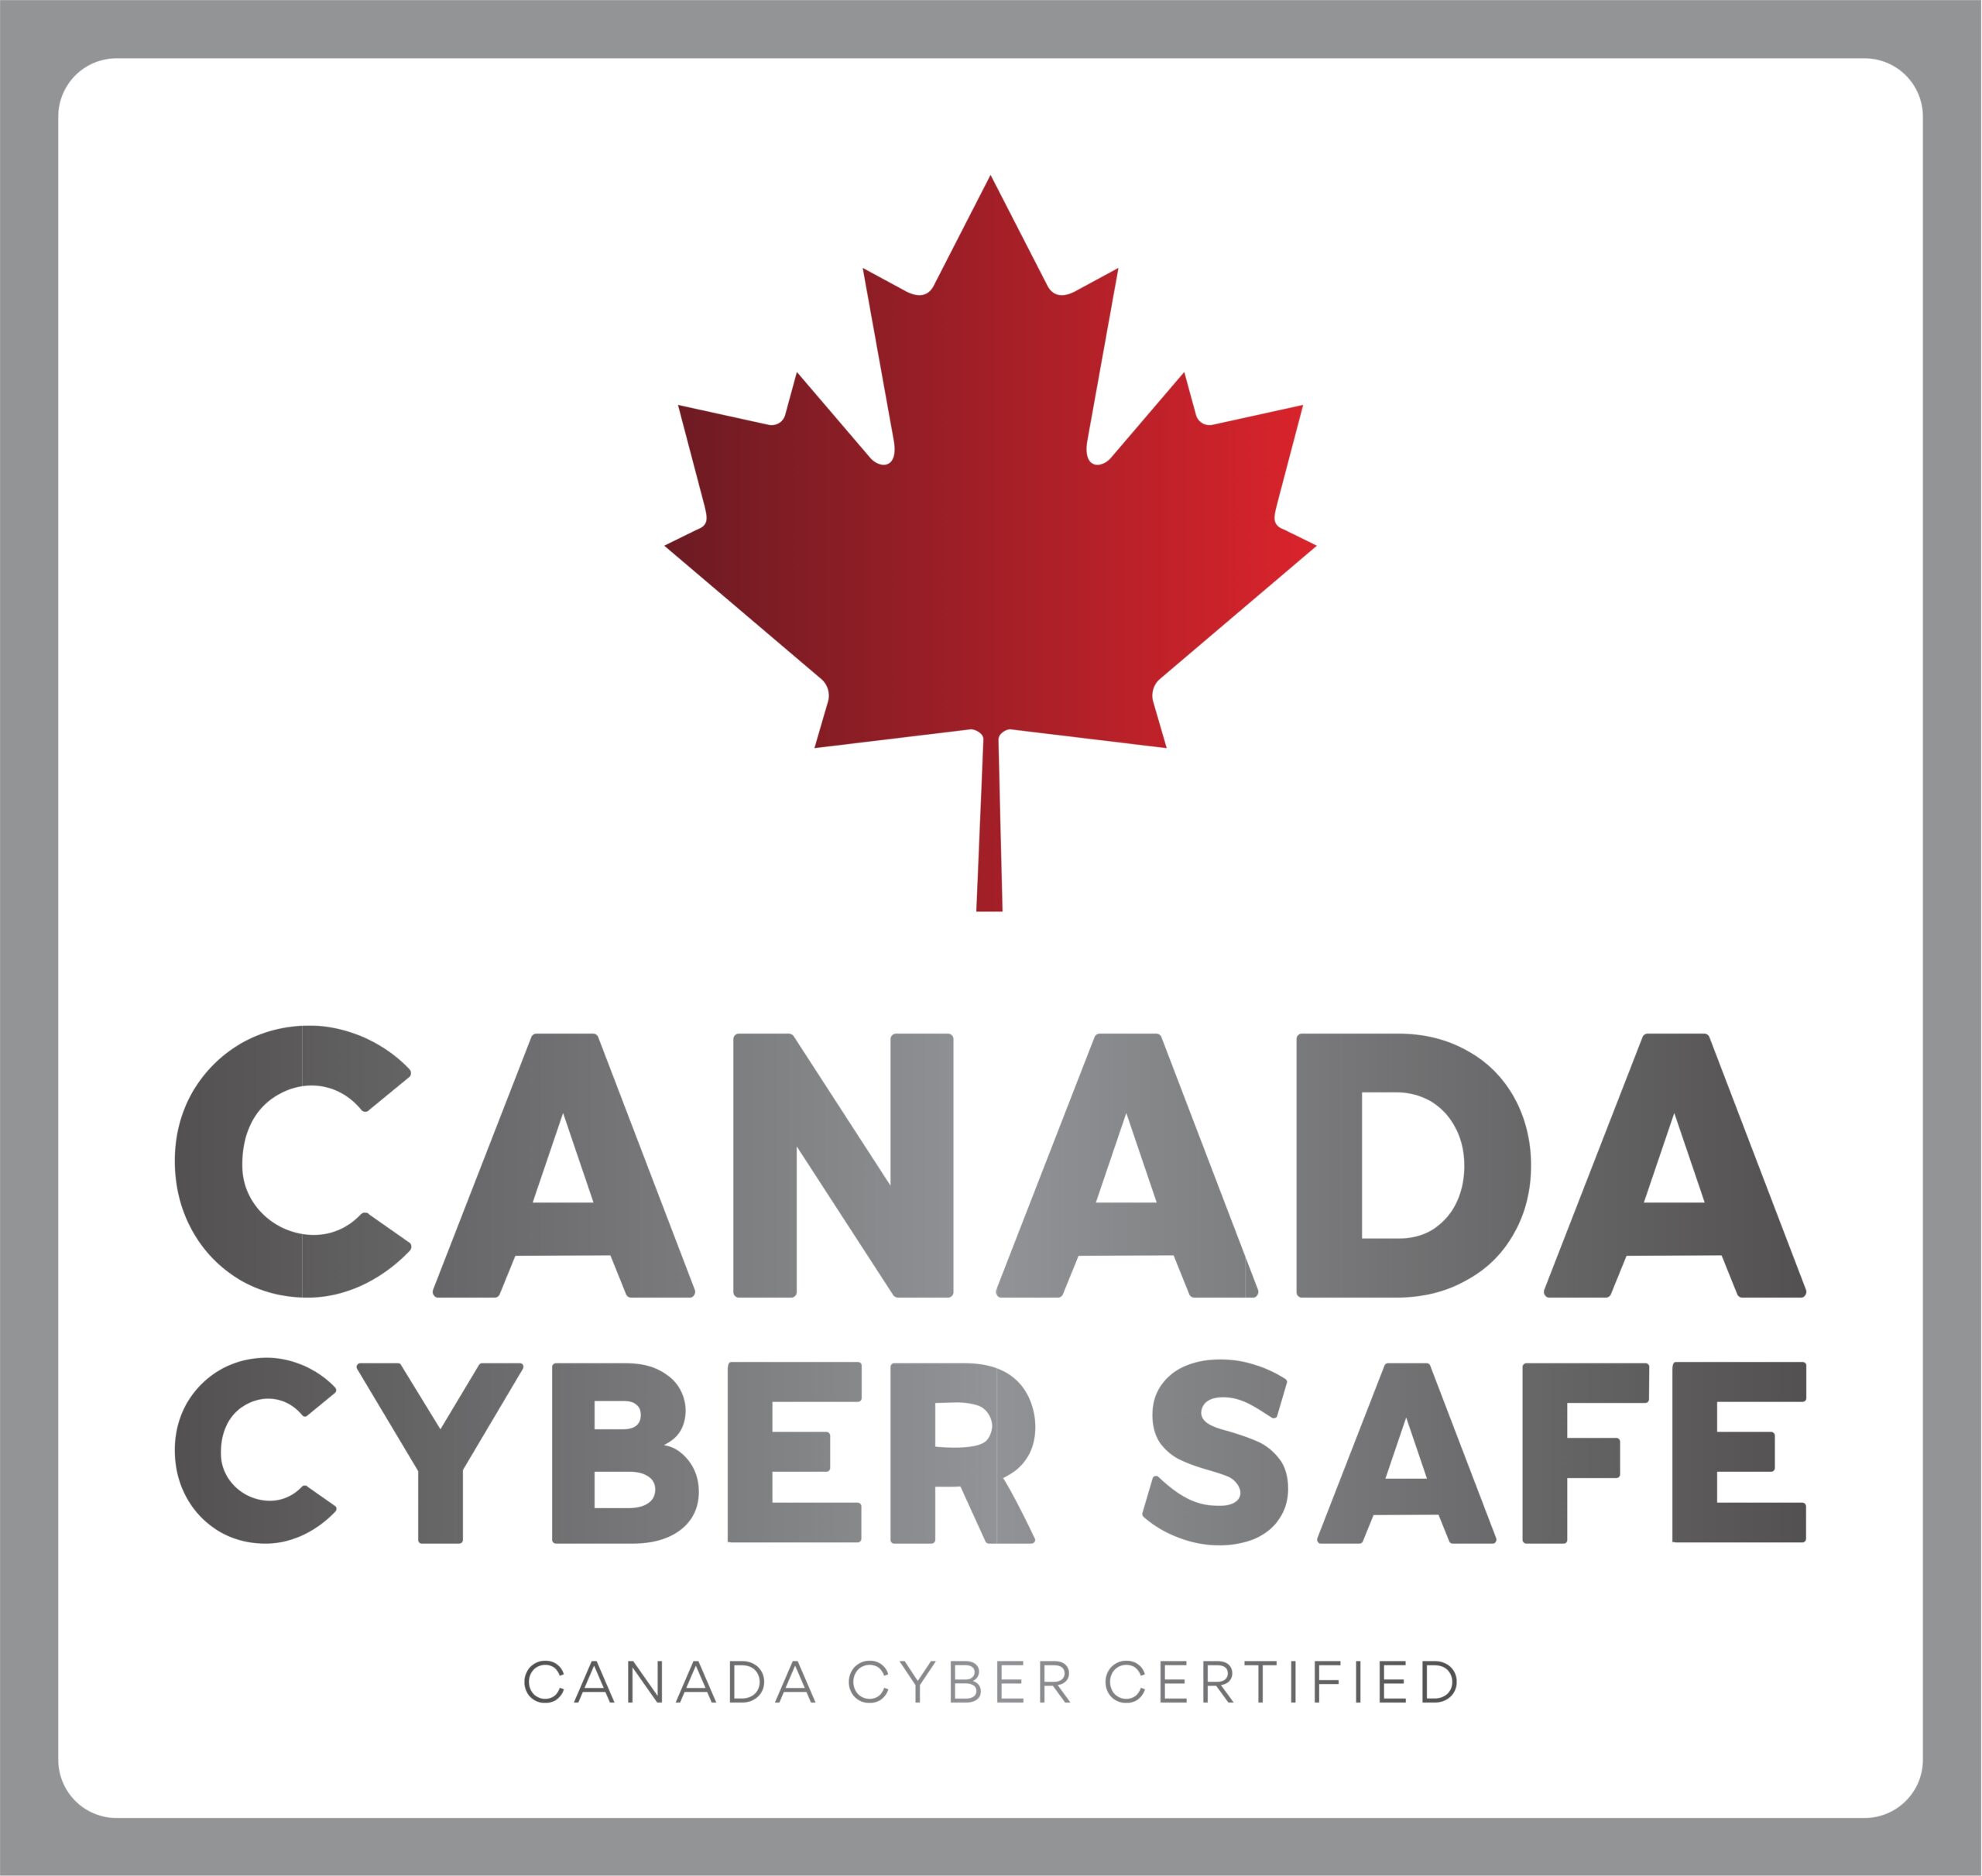 Canada Cyber Safe Color logo with background